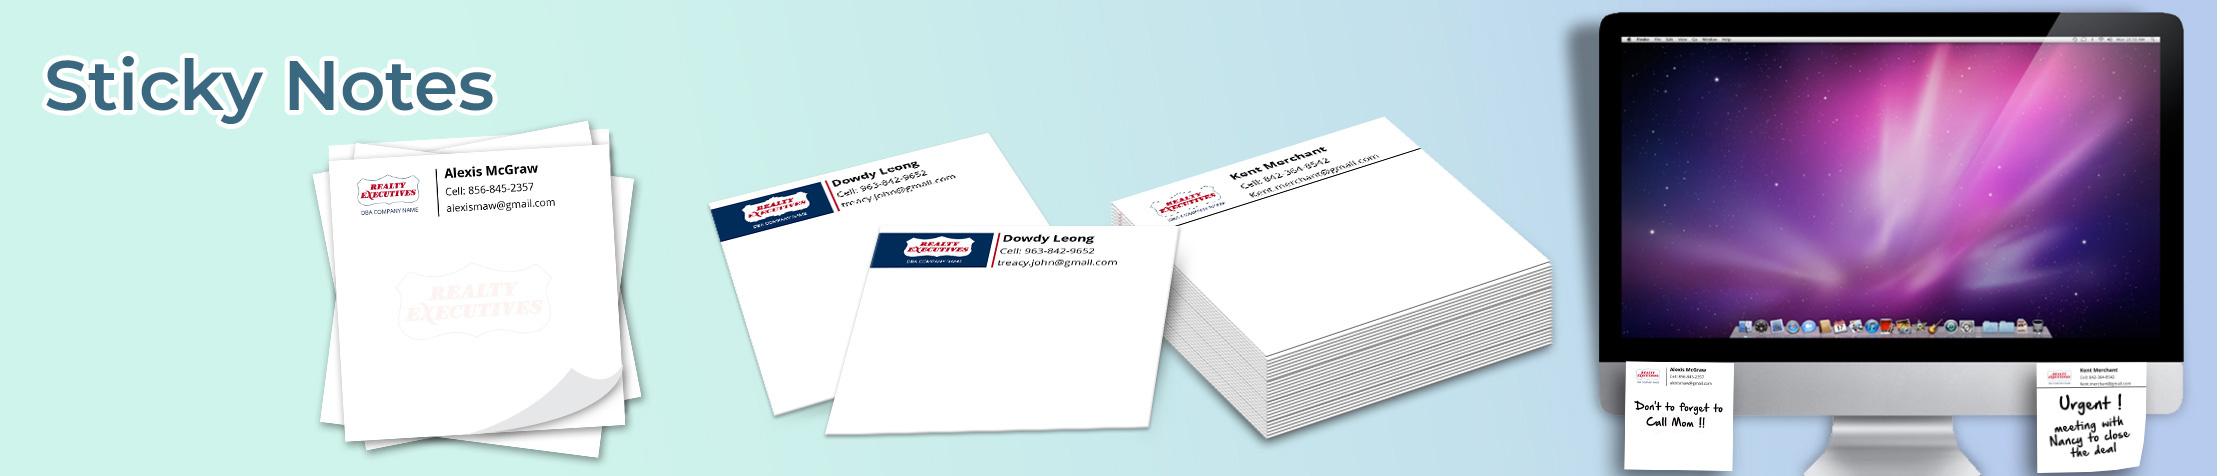 Realty Executives Real Estate Sticky Notes - Realty Executives  personalized realtor post it note pads | BestPrintBuy.com